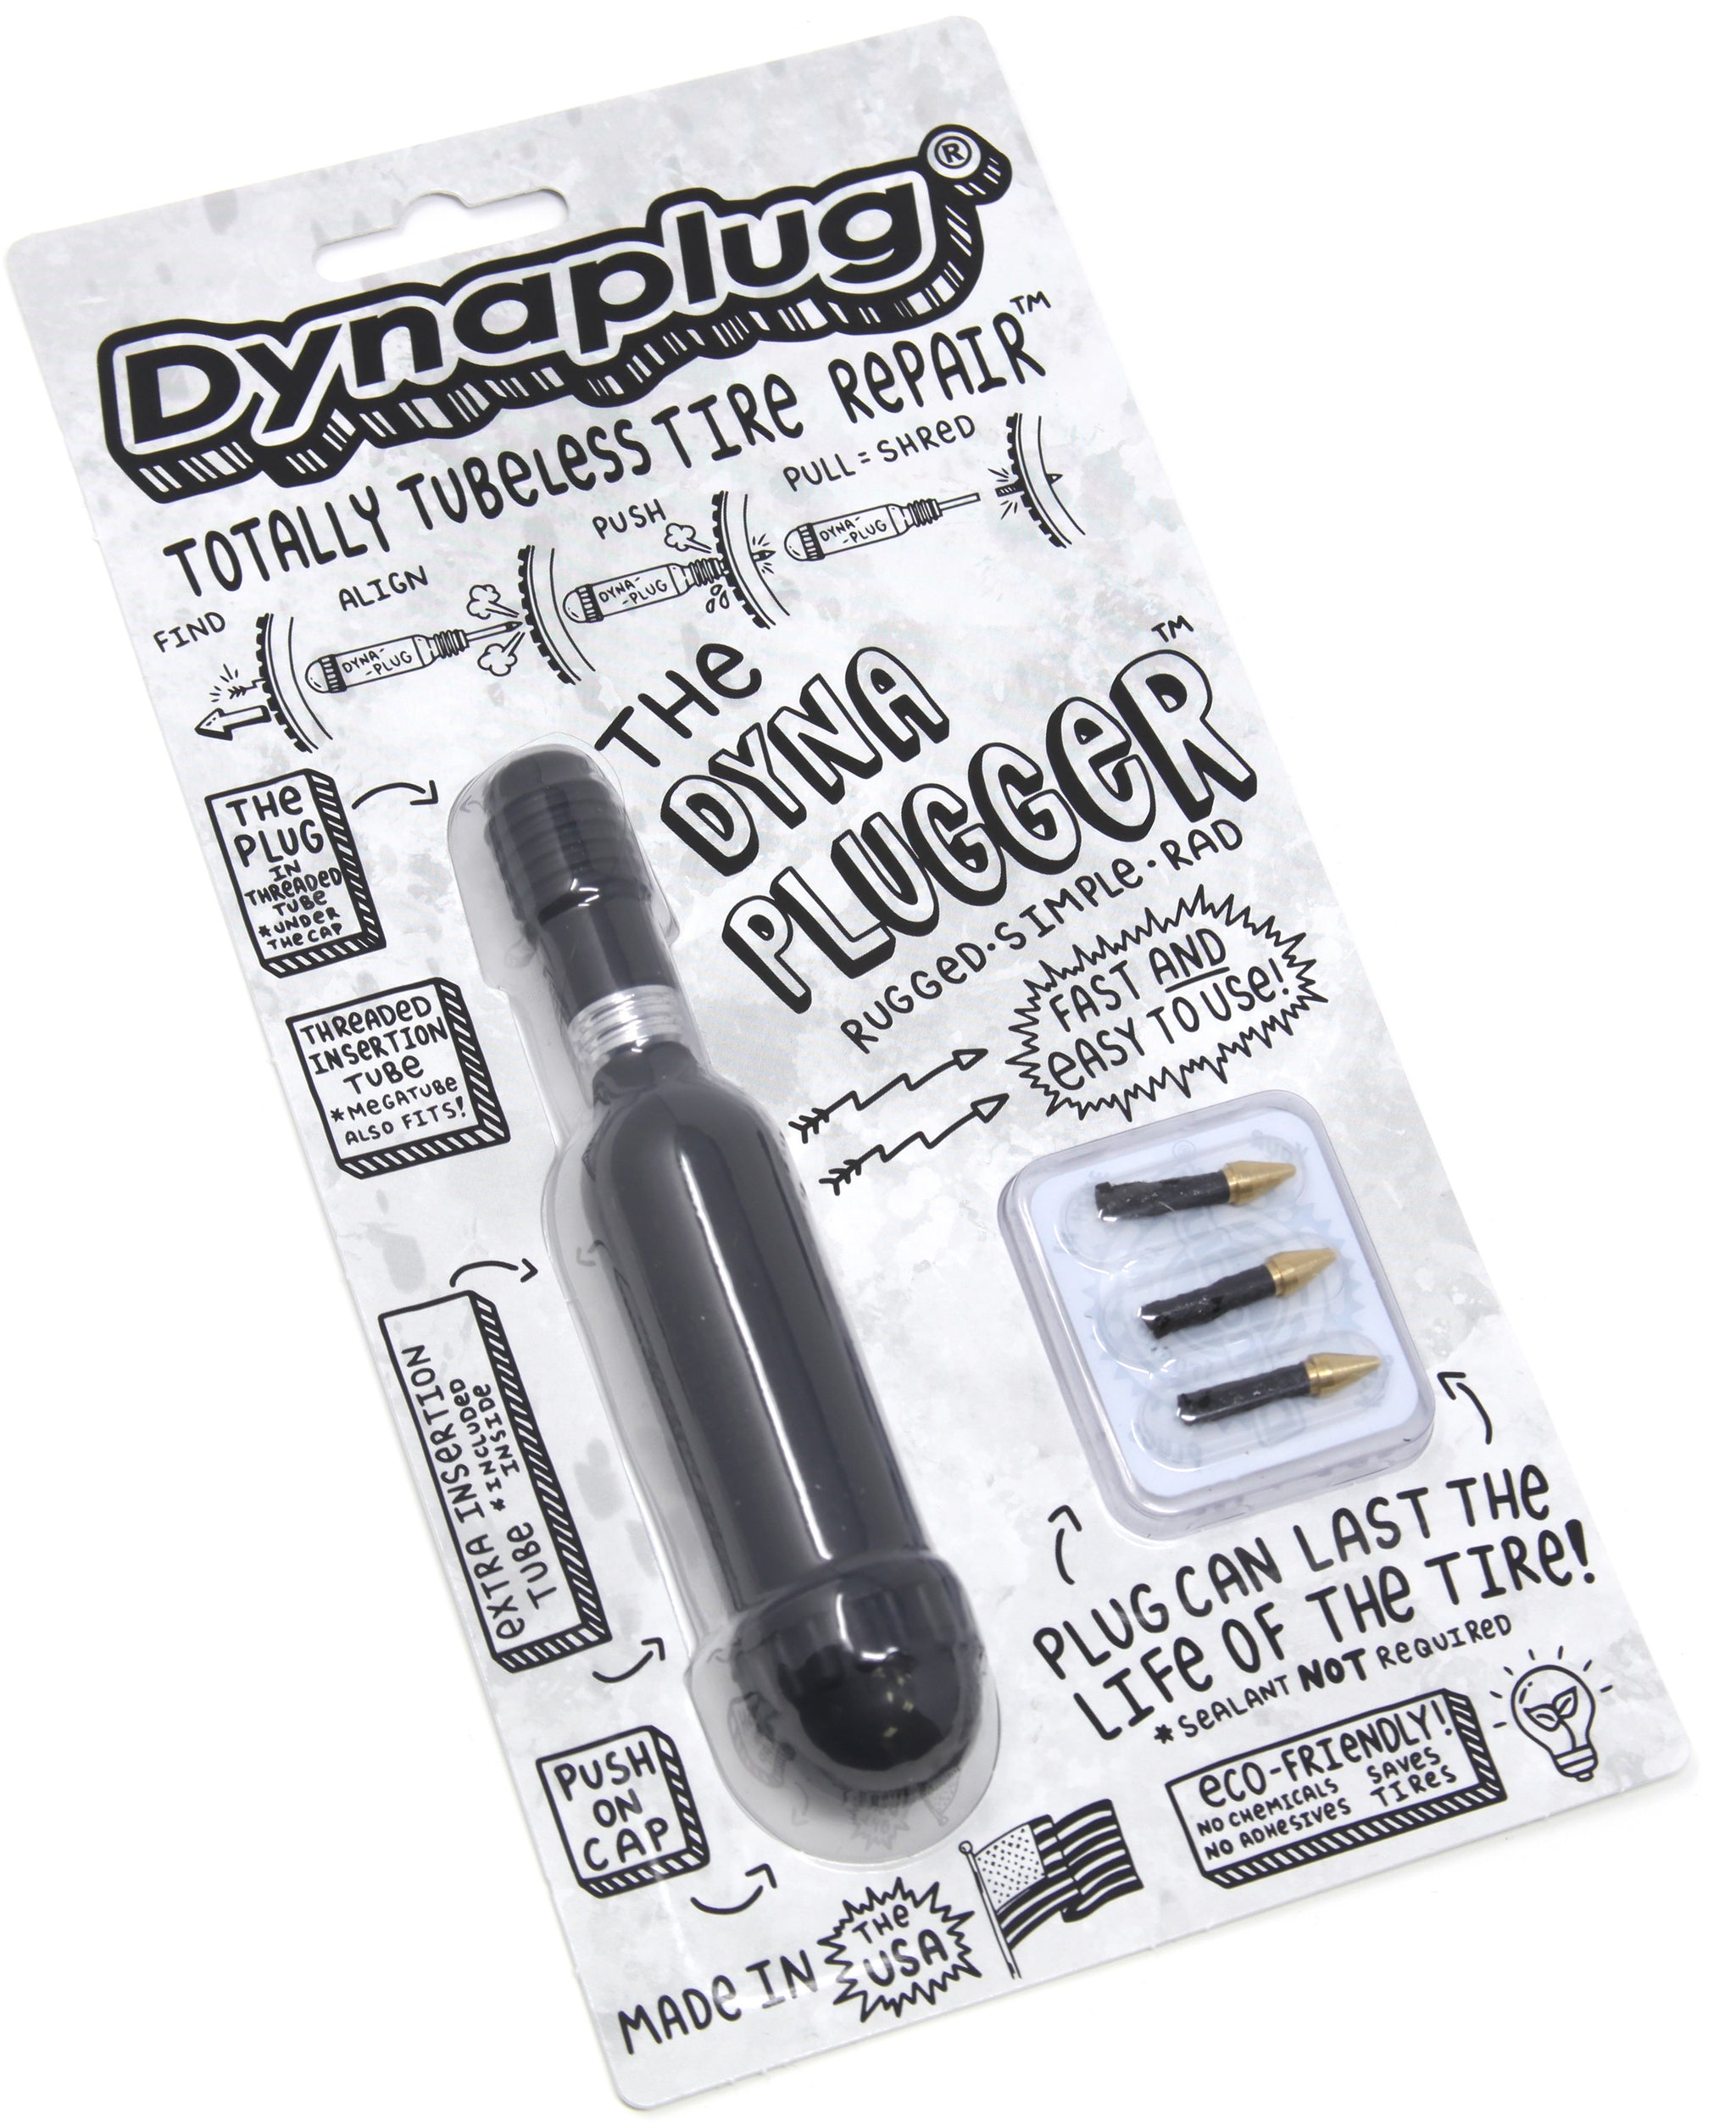 Dynaplug tubeless tyre puncture repair kits for cars & motorcycles